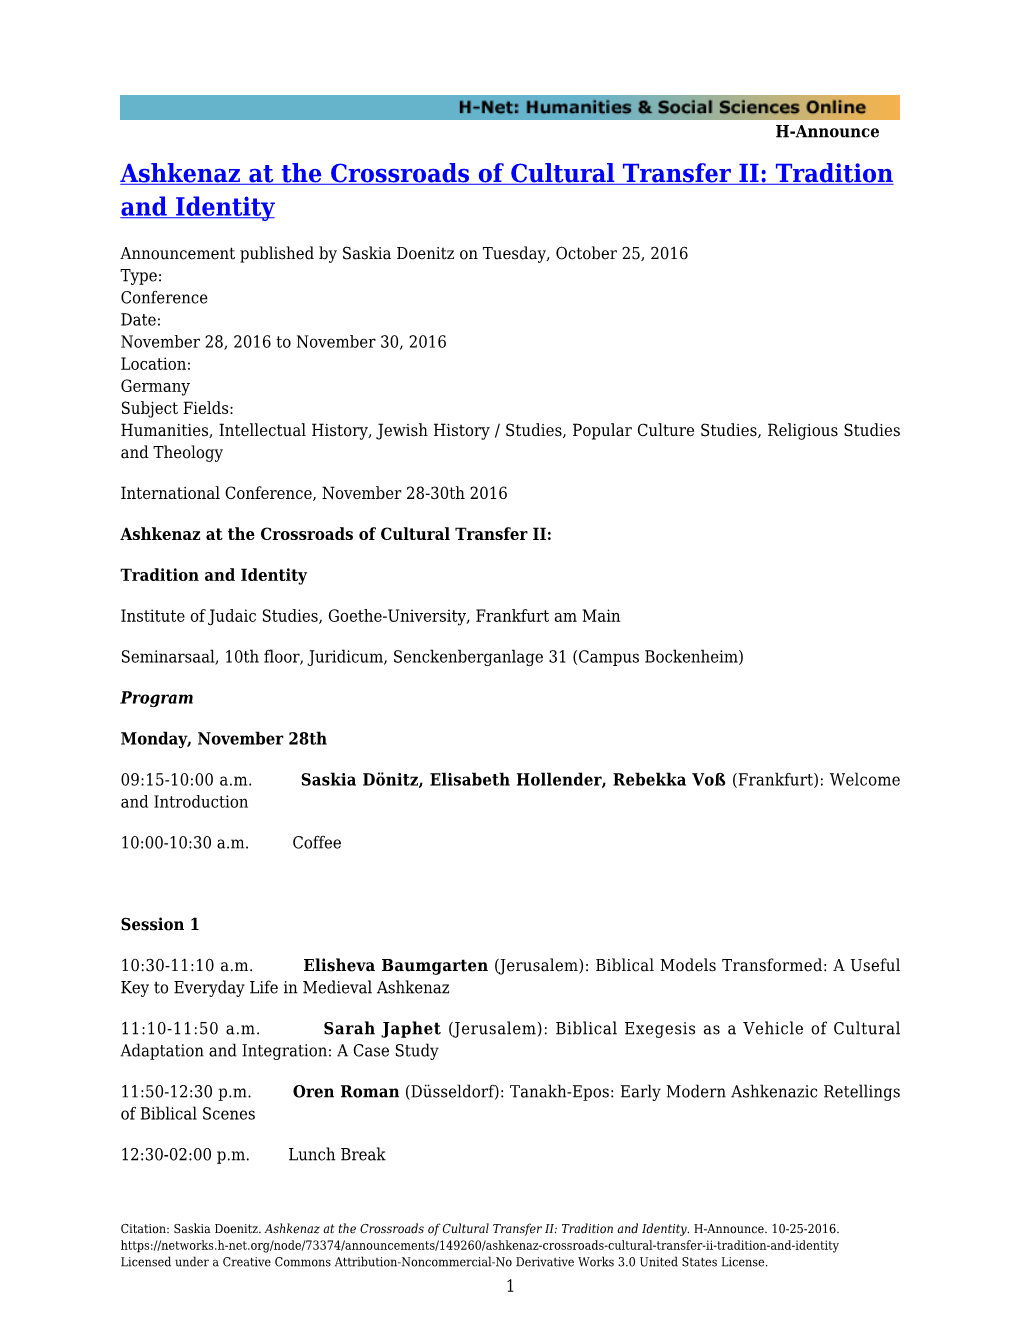 Ashkenaz at the Crossroads of Cultural Transfer II: Tradition and Identity